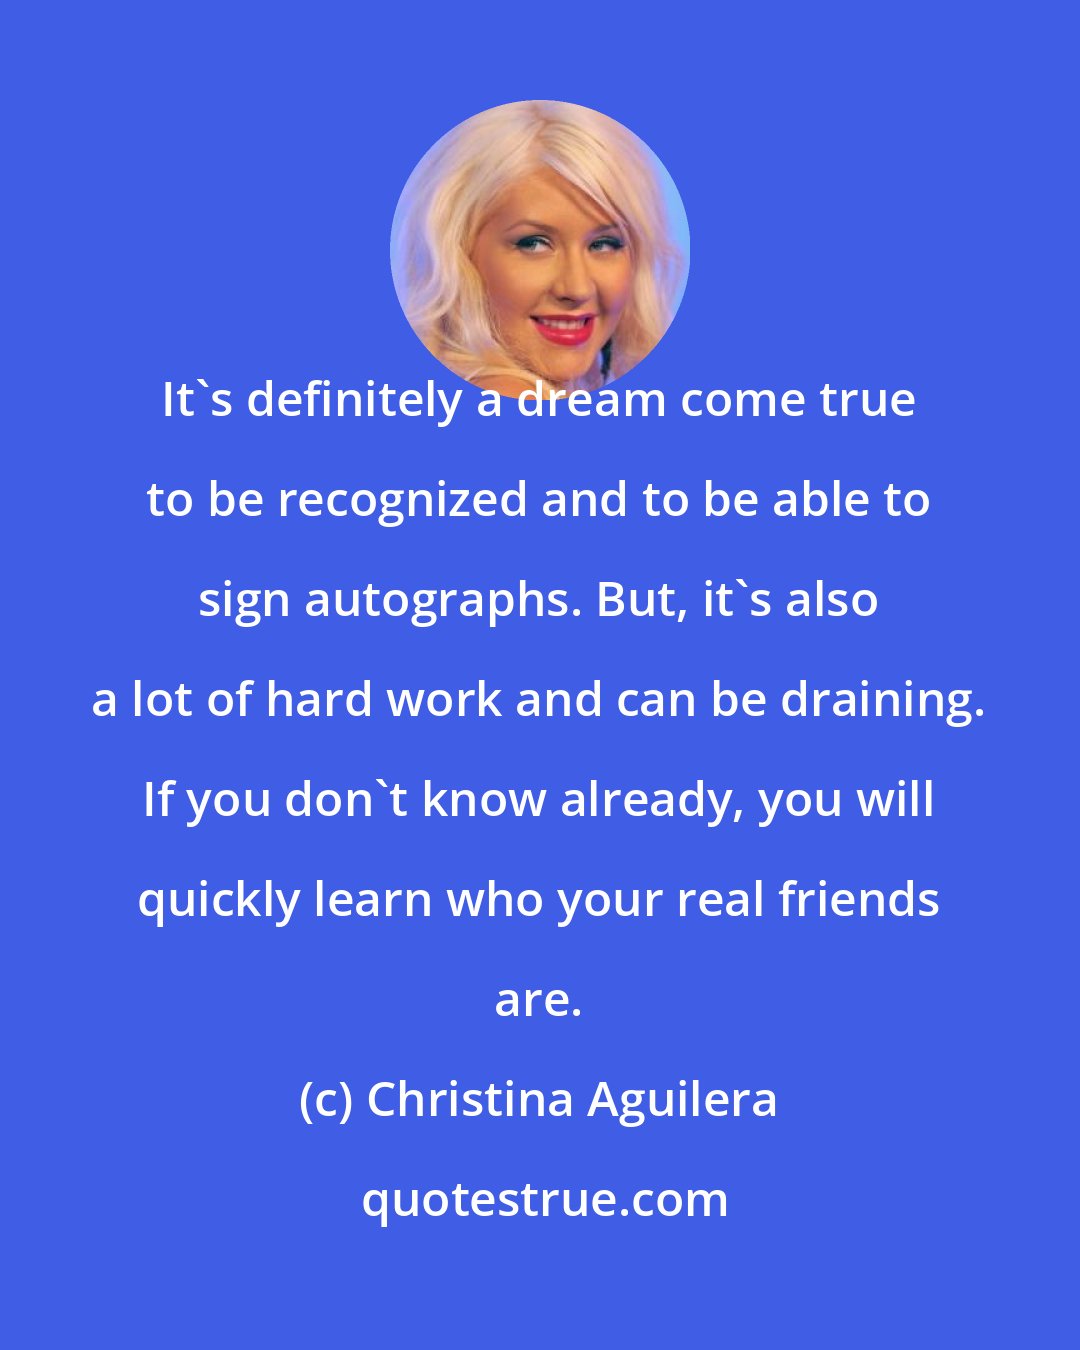 Christina Aguilera: It's definitely a dream come true to be recognized and to be able to sign autographs. But, it's also a lot of hard work and can be draining. If you don't know already, you will quickly learn who your real friends are.